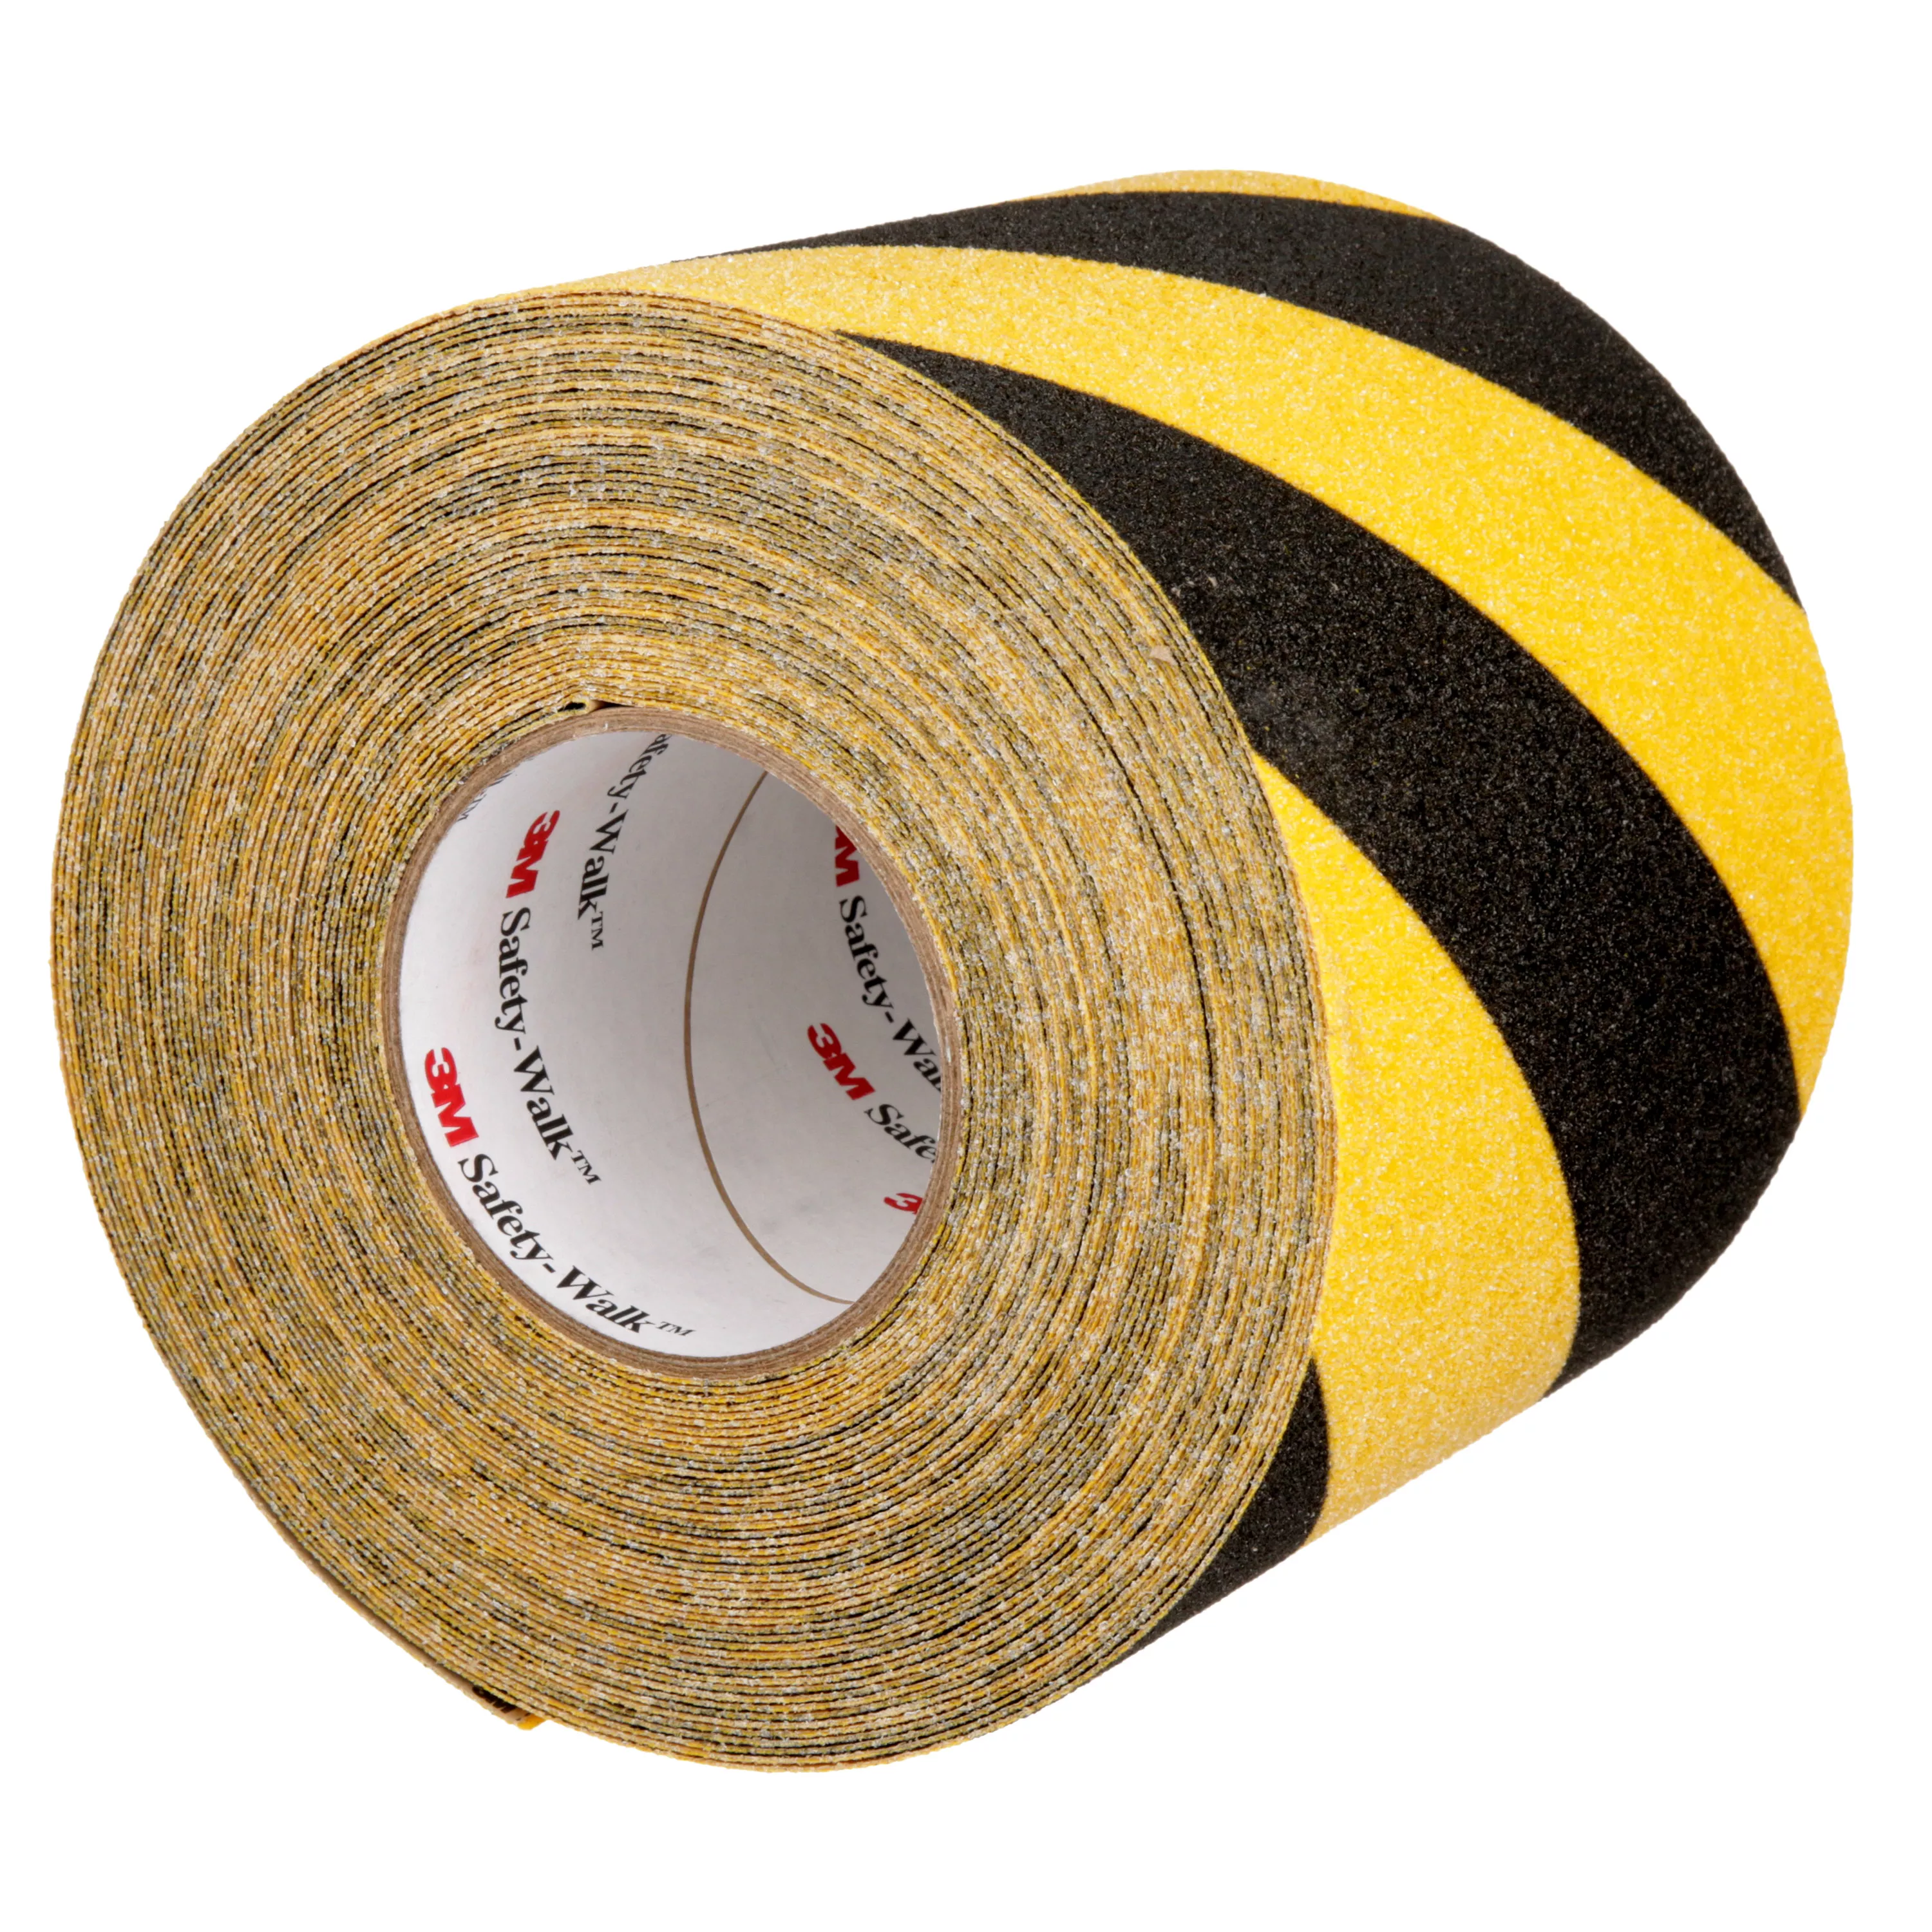 Product Number 613 | 3M™ Safety-Walk™ Slip-Resistant General Purpose Tapes & Treads 613